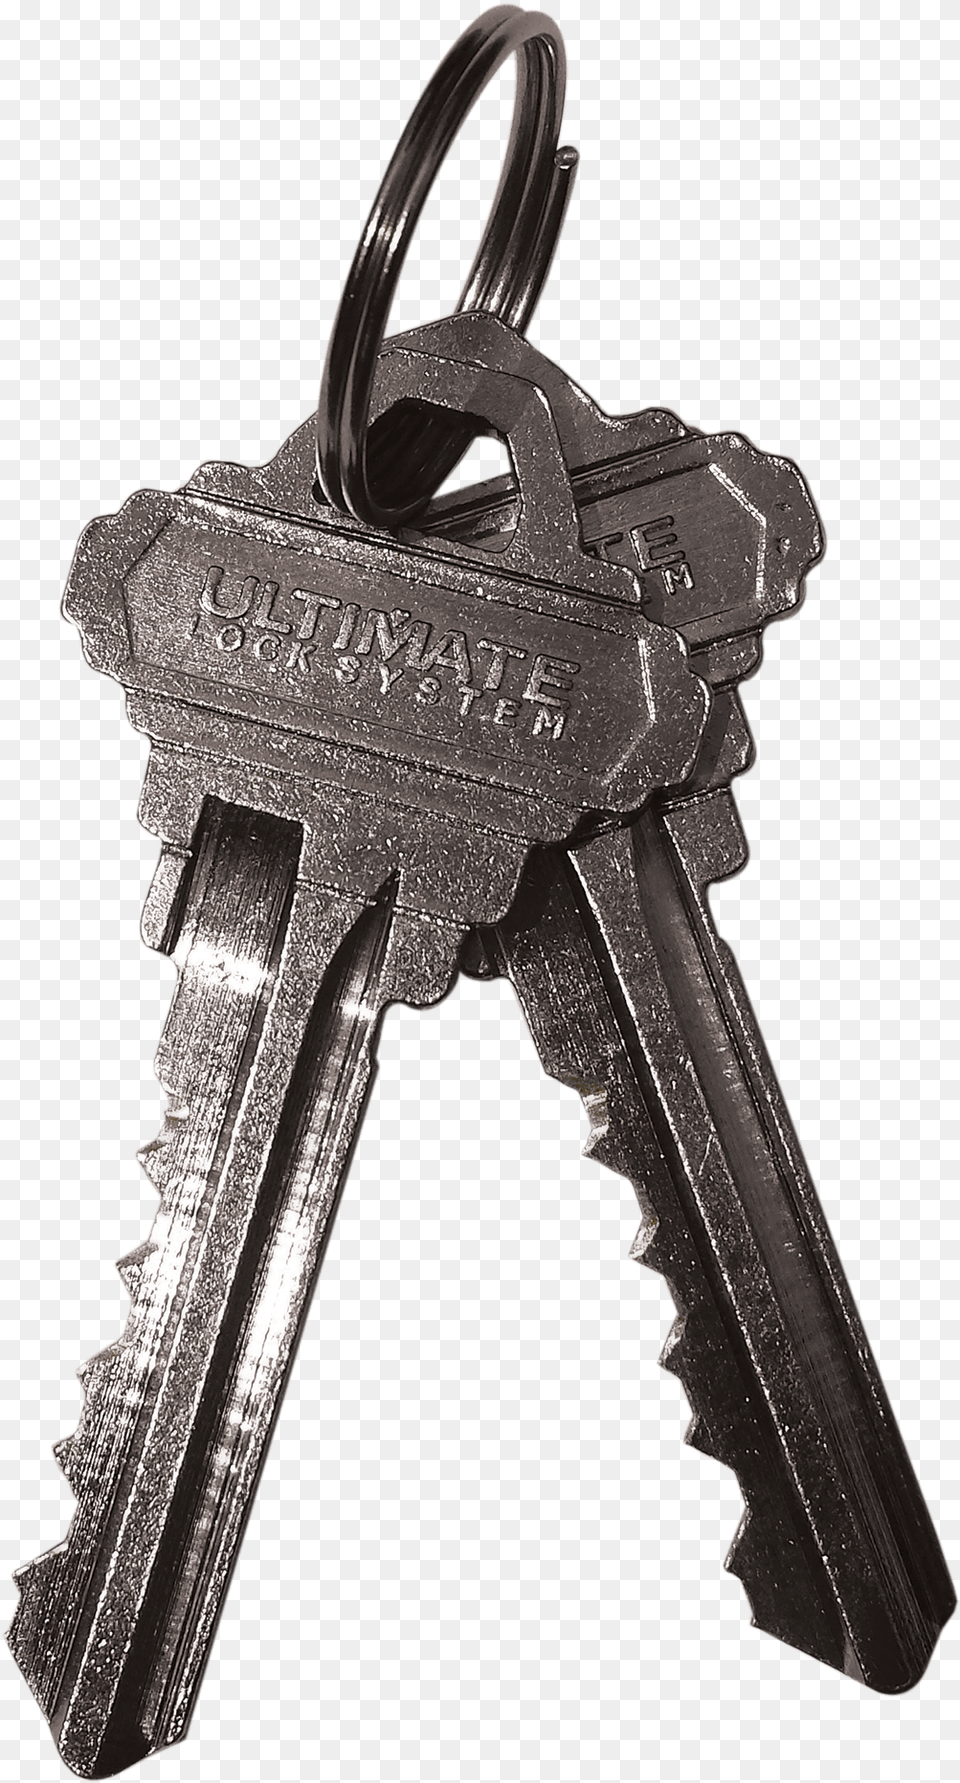 Keychainfashion Accessorymetal Paintball Marker, Key, Sword, Weapon Png Image